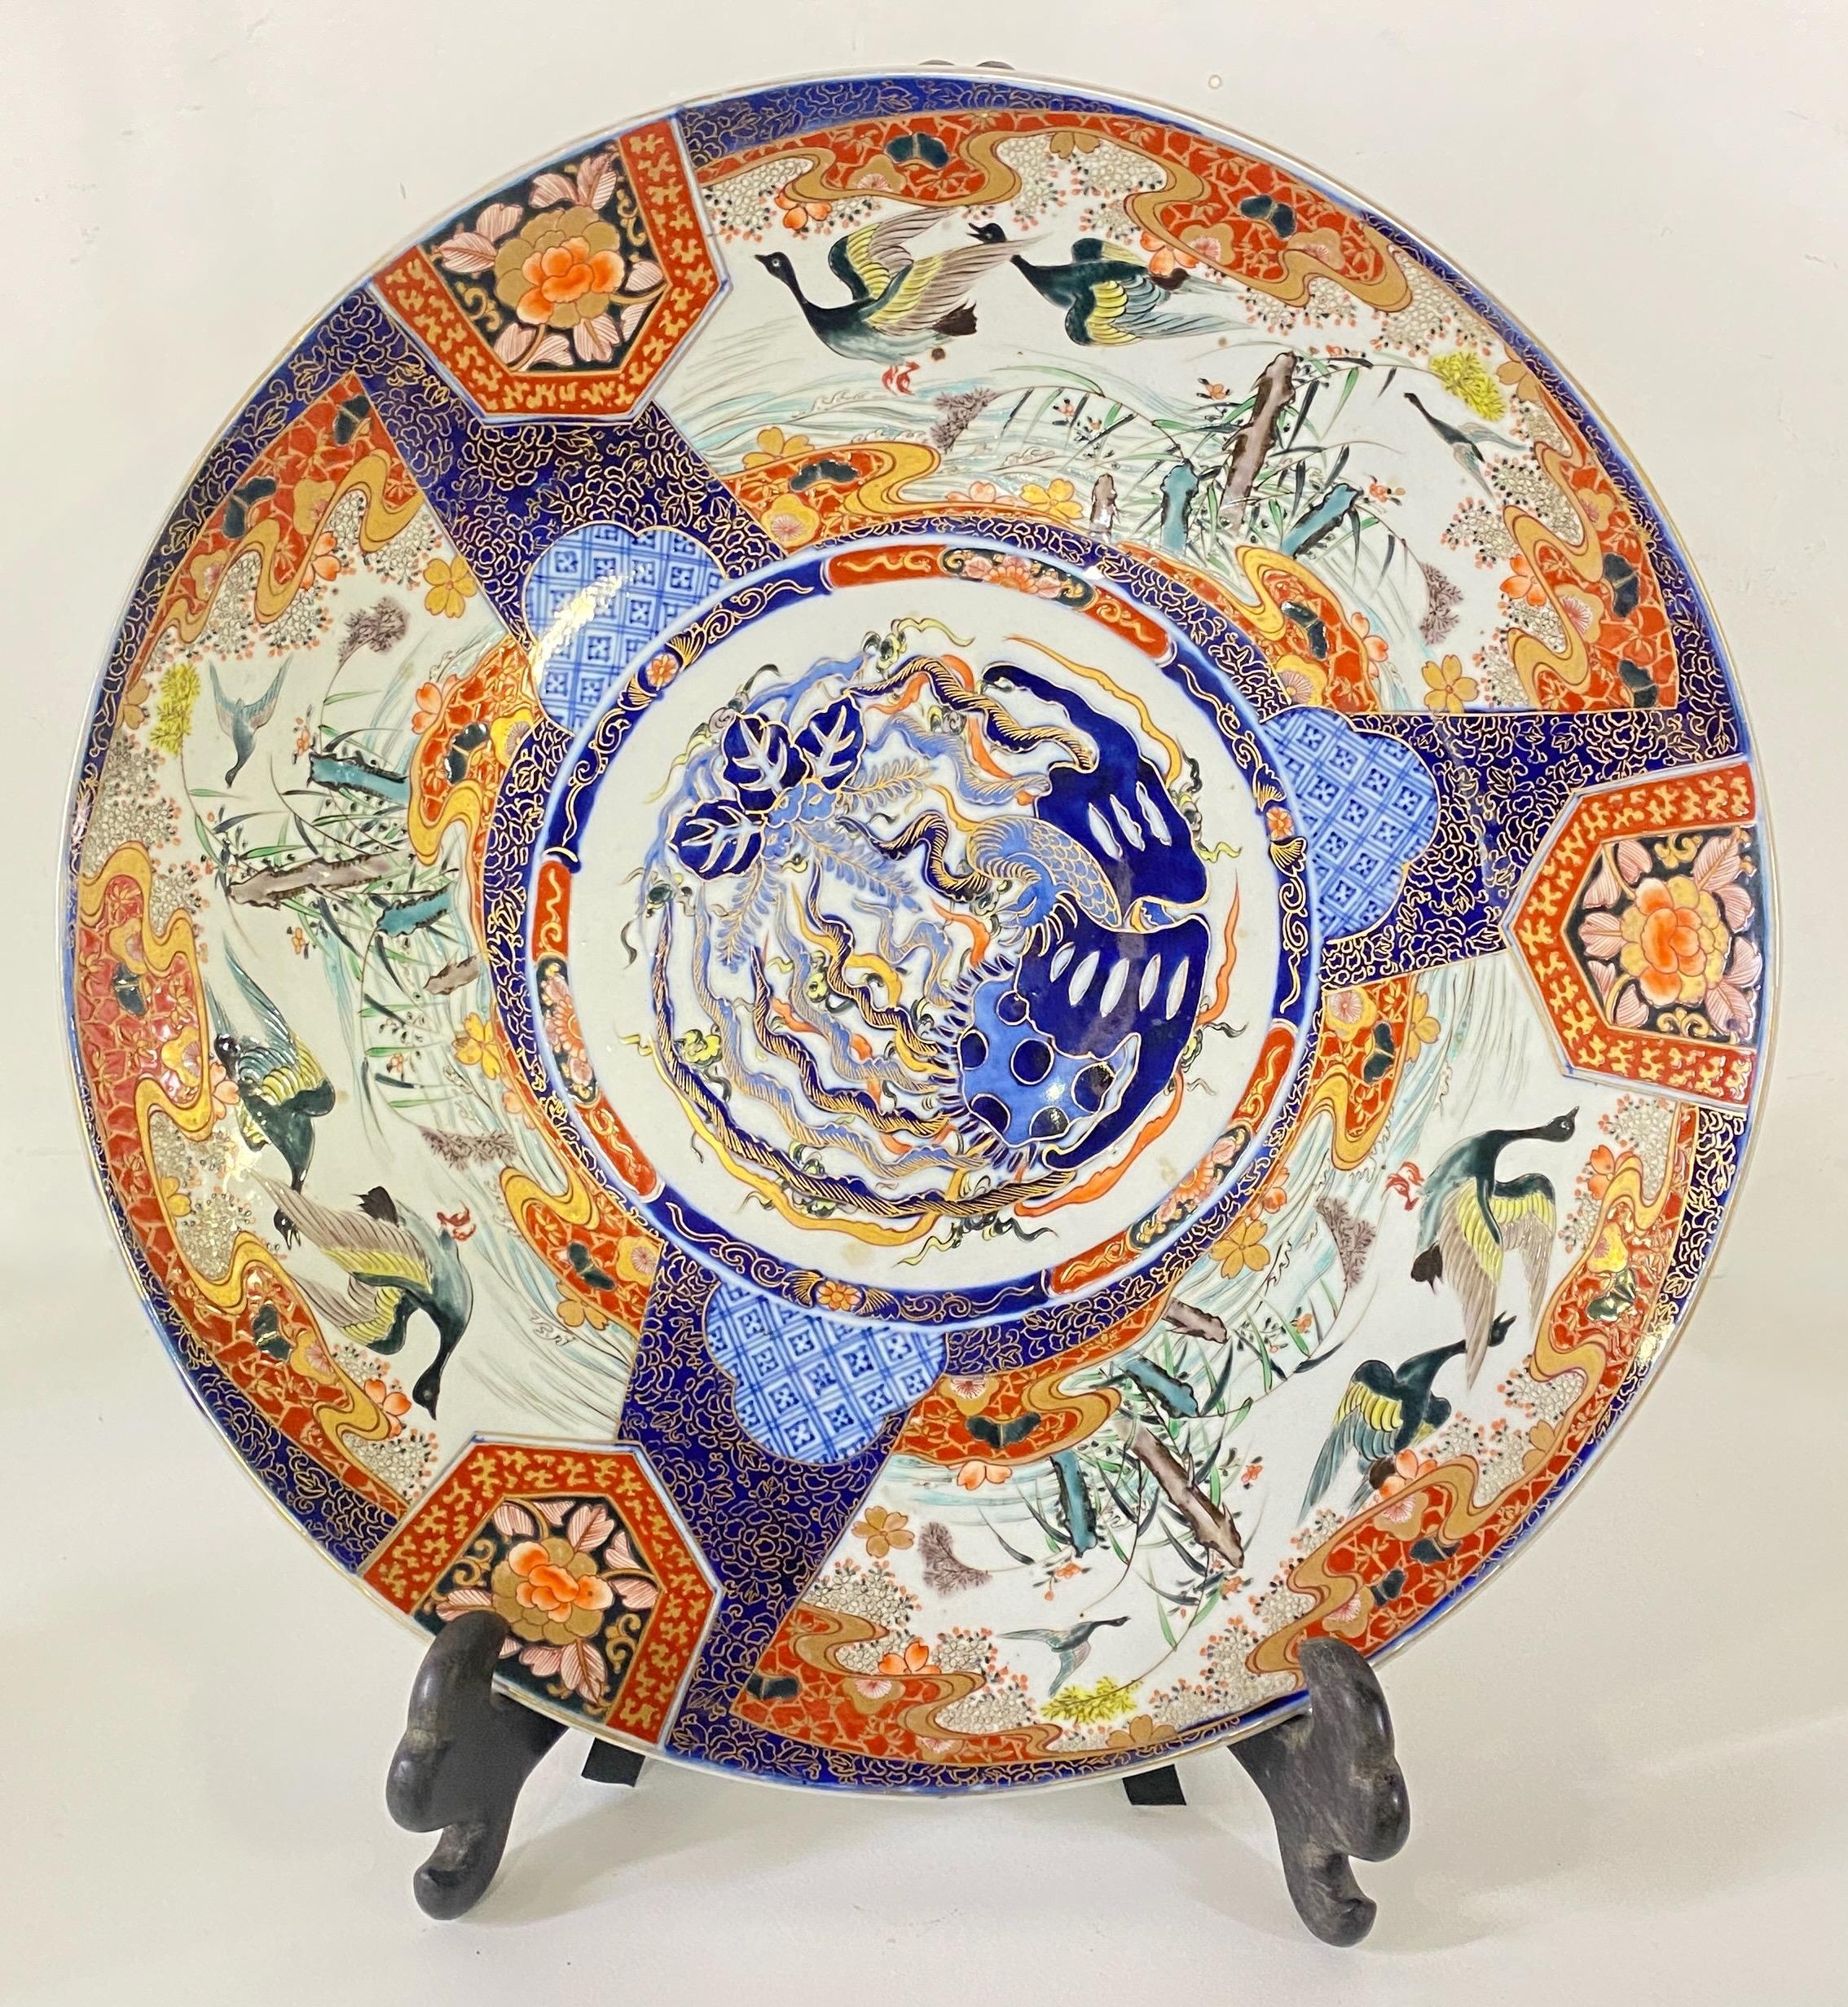 A large and very fine quality late 19th century Japanese porcelain charger. Having classical motif hand painted decoration to the border with wonderful orange and blue colors.
In lovely antique condition.
Japan, Meiji period. 